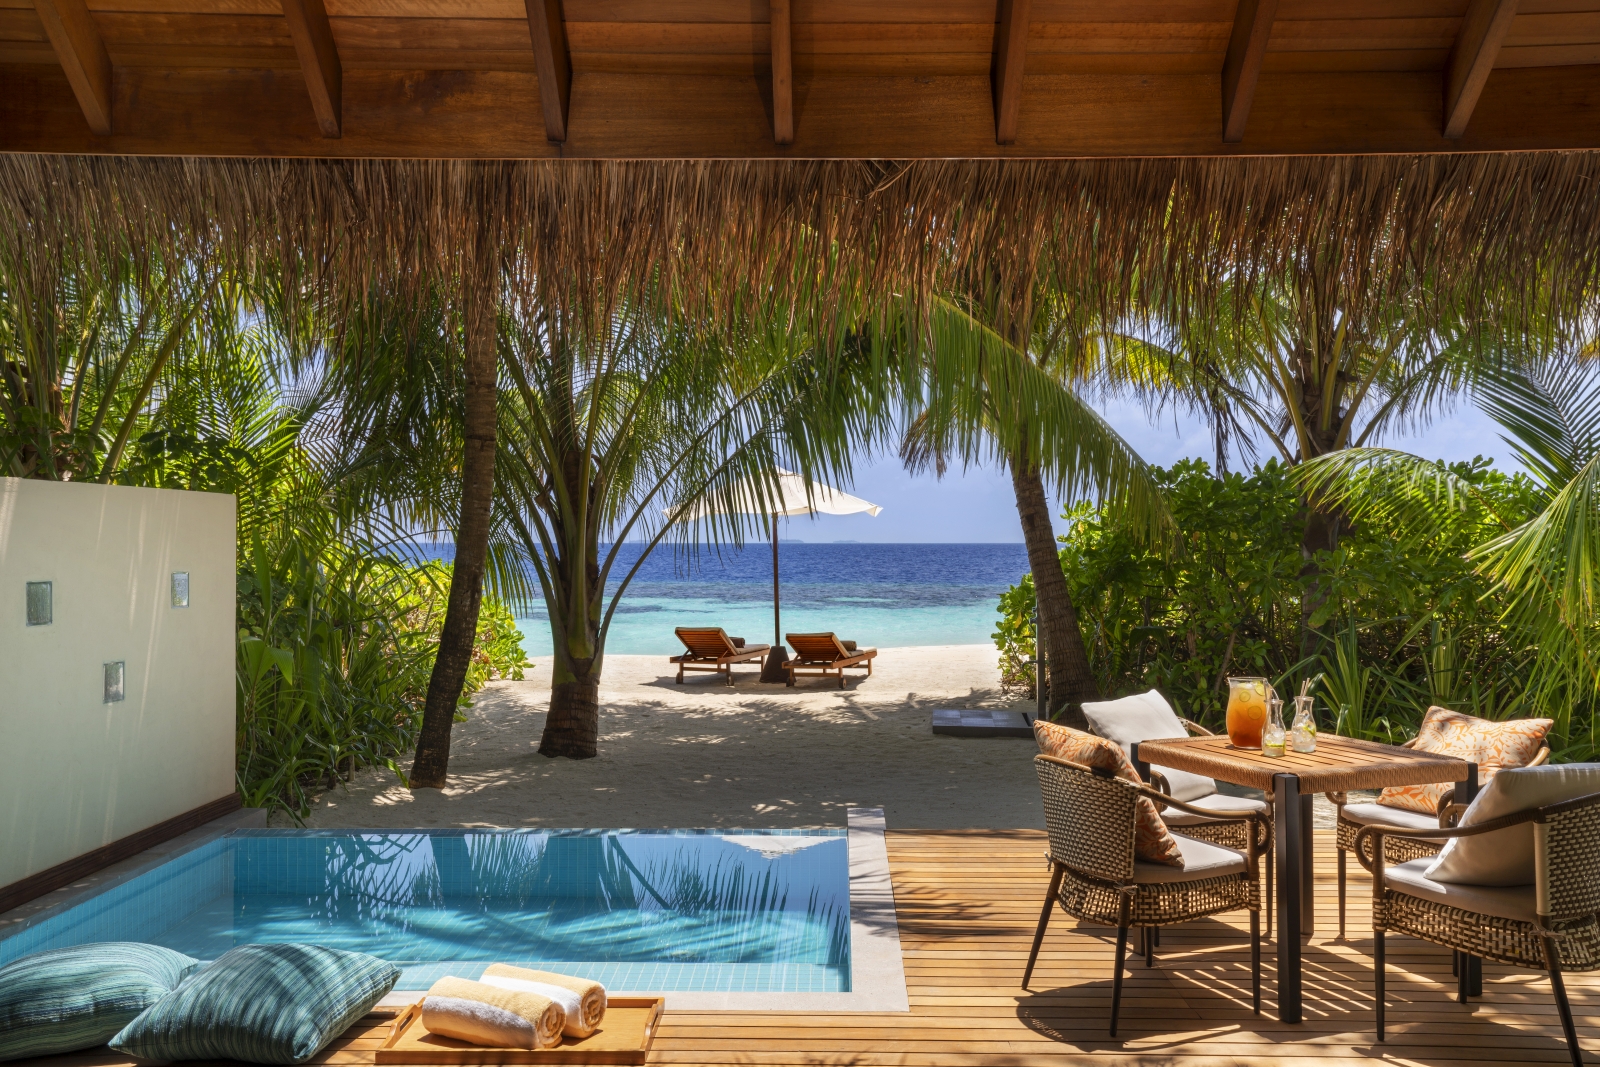 Private pool and terrace of a Deluxe Beach Bungalow at luxury resort Huvafen Fushi in the Maldives